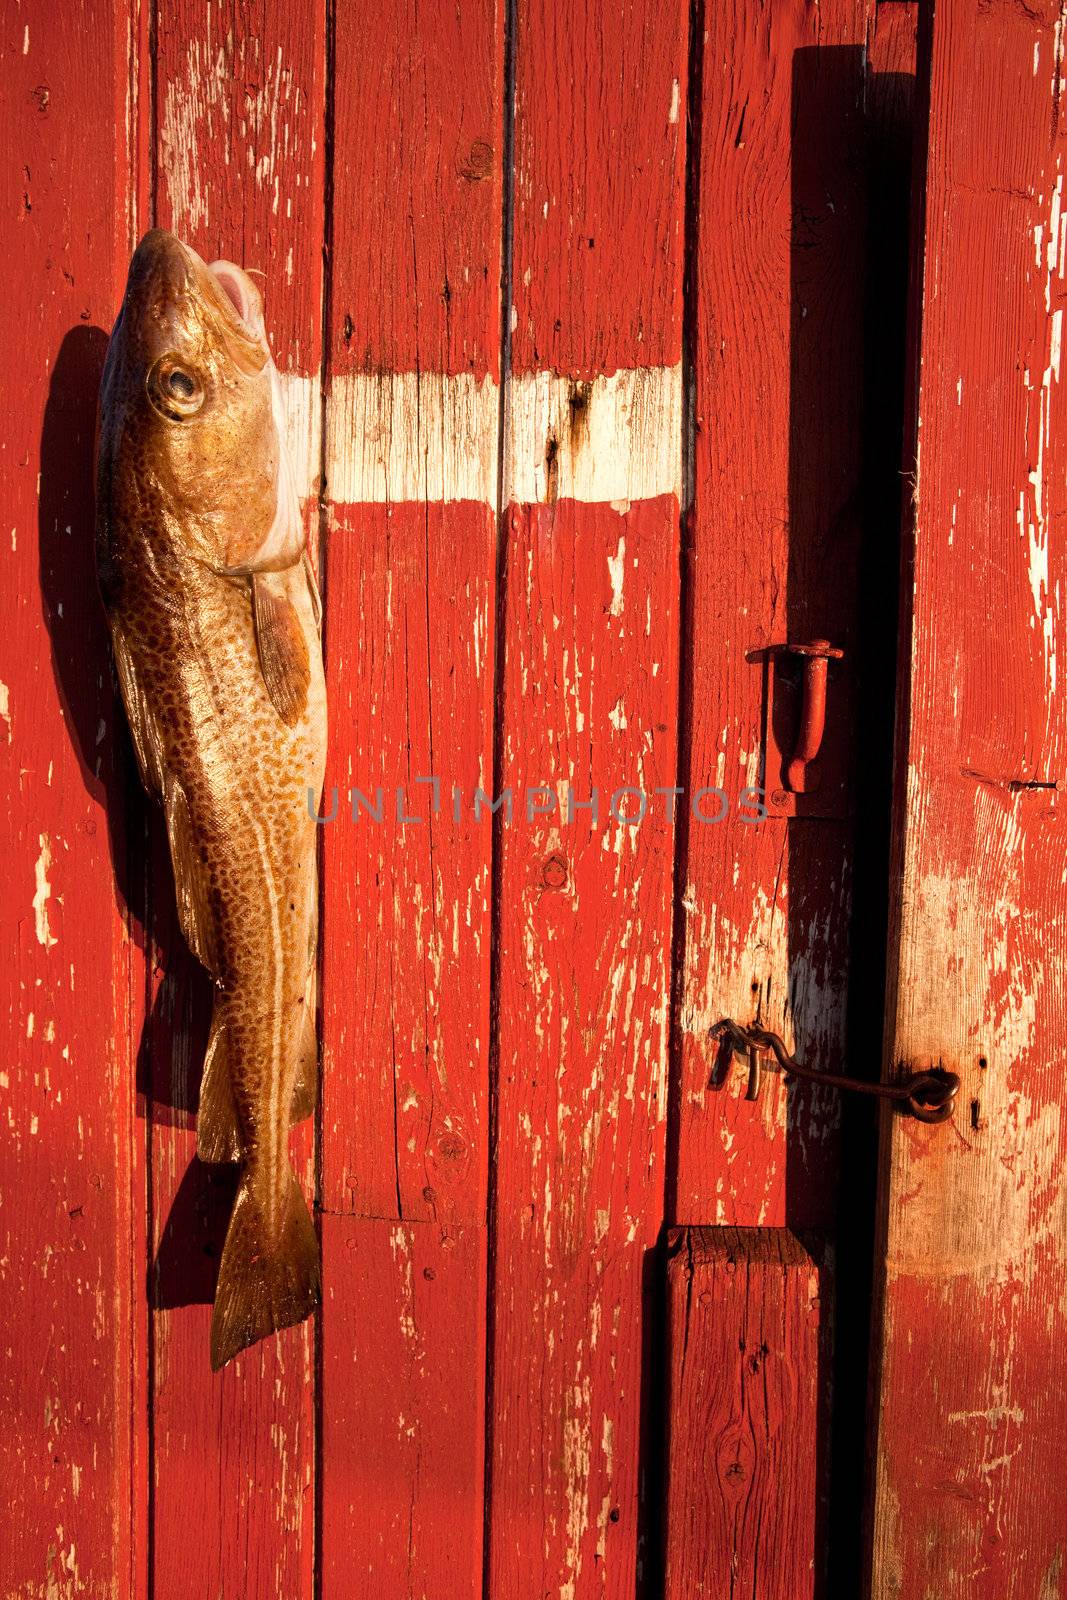 A fresh caught cod fish against a red background